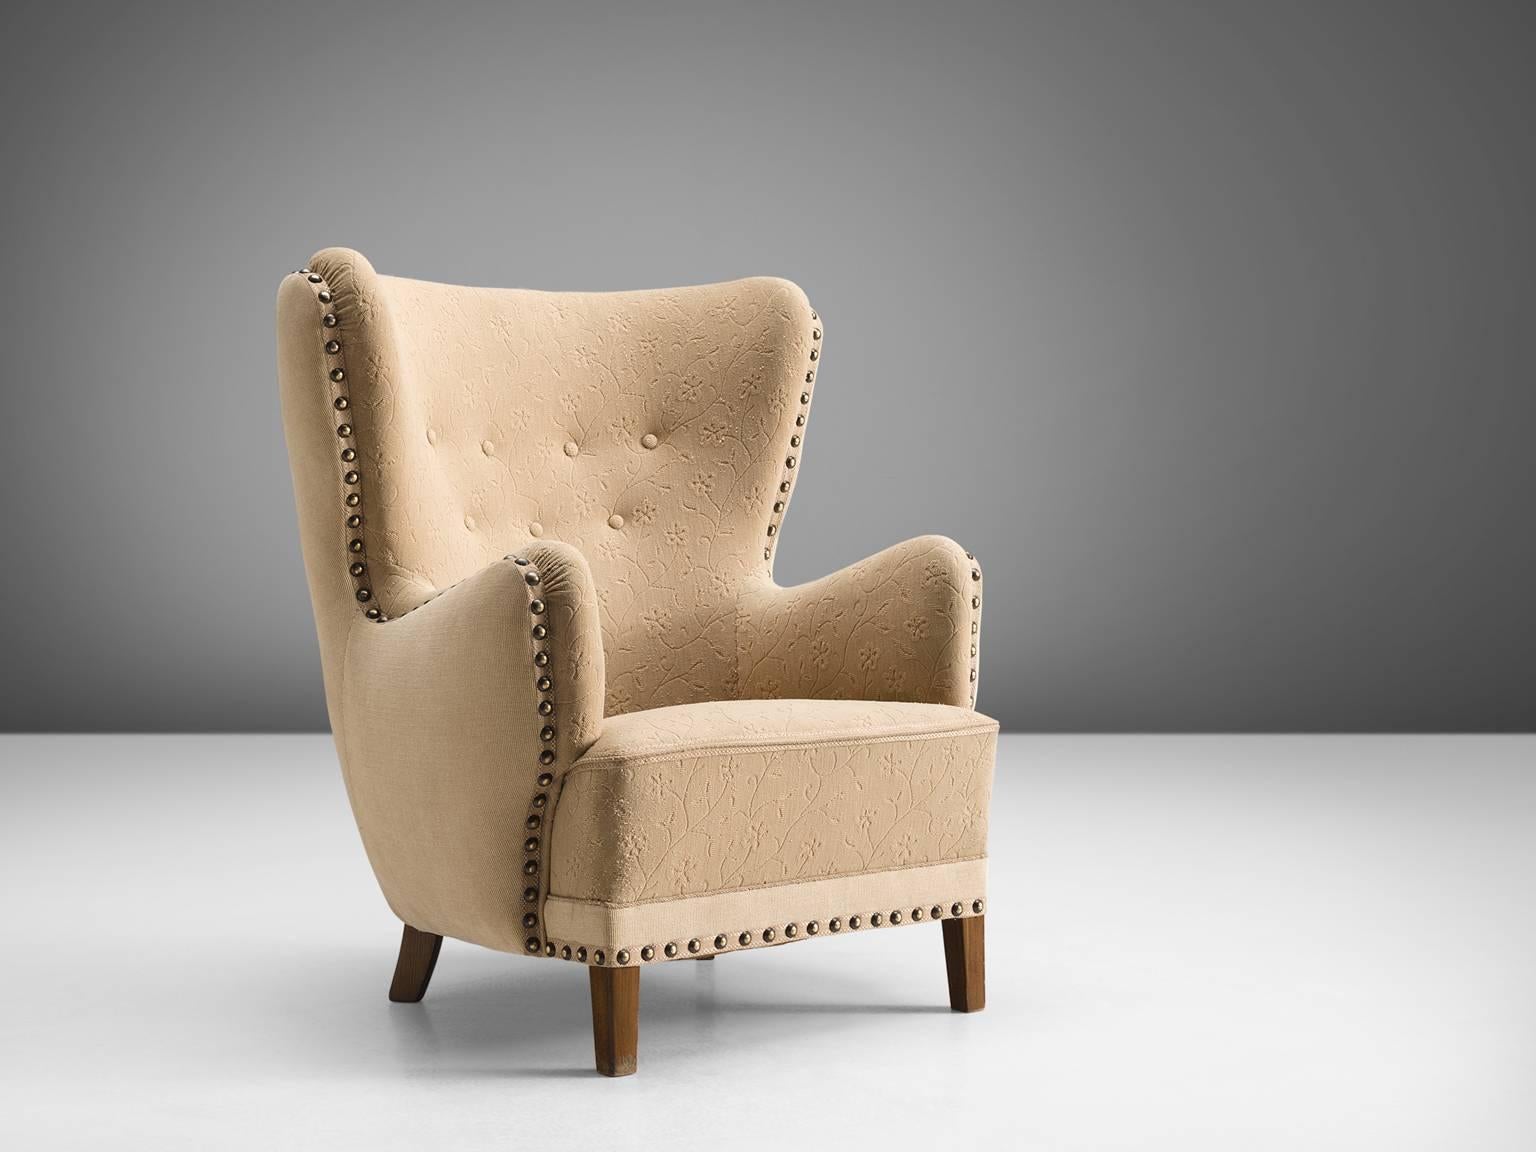 Danish cabinetmaker, lounge chair with stained beech legs and beige fabric, Denmark, 1950s 

This easy chair with stained beech legs features a modest wing and buttoned back. The seat is thick and the armrests are rounded. The frame of the chair is